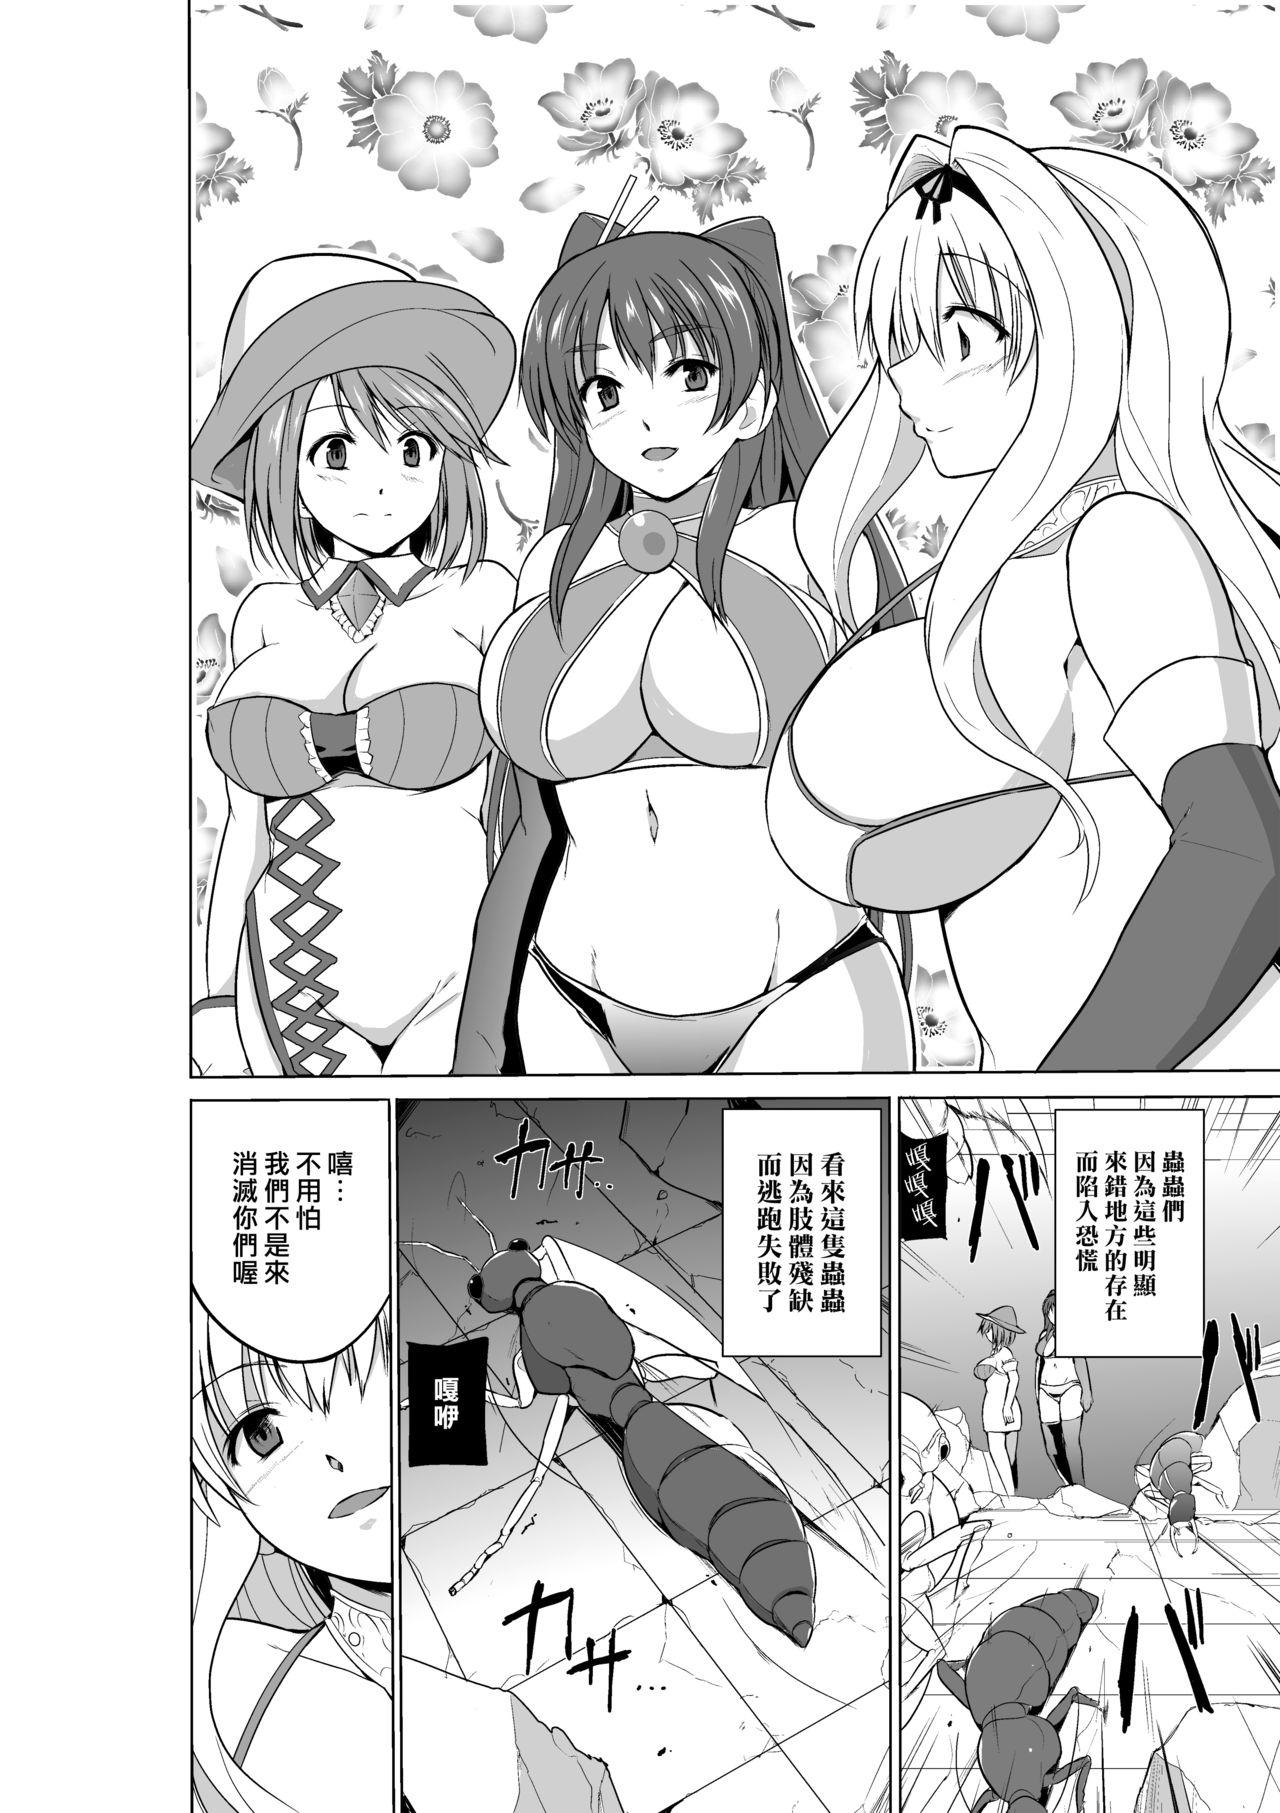 Pierced Dungeon Travelers Minna no Oyuugi - Toheart2 Ride - Page 2